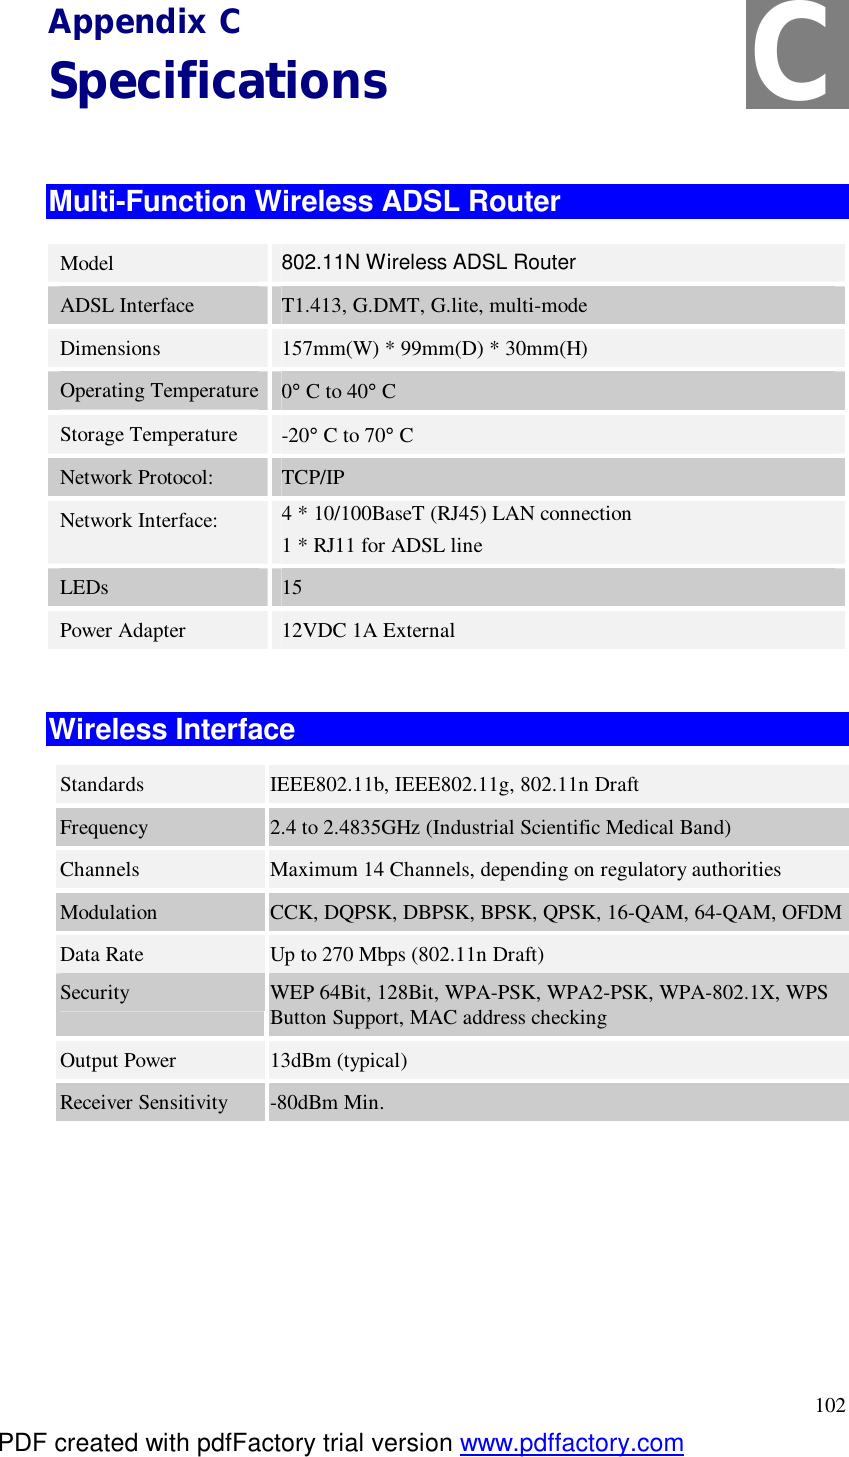  102 Appendix C Specifications  Multi-Function Wireless ADSL Router Model  802.11N Wireless ADSL Router ADSL Interface  T1.413, G.DMT, G.lite, multi-mode Dimensions  157mm(W) * 99mm(D) * 30mm(H) Operating Temperature 0° C to 40° C Storage Temperature  -20° C to 70° C Network Protocol:  TCP/IP Network Interface:  4 * 10/100BaseT (RJ45) LAN connection 1 * RJ11 for ADSL line LEDs  15 Power Adapter  12VDC 1A External  Wireless Interface Standards  IEEE802.11b, IEEE802.11g, 802.11n Draft Frequency  2.4 to 2.4835GHz (Industrial Scientific Medical Band) Channels  Maximum 14 Channels, depending on regulatory authorities Modulation  CCK, DQPSK, DBPSK, BPSK, QPSK, 16-QAM, 64-QAM, OFDM Data Rate  Up to 270 Mbps (802.11n Draft) Security  WEP 64Bit, 128Bit, WPA-PSK, WPA2-PSK, WPA-802.1X, WPS Button Support, MAC address checking Output Power  13dBm (typical) Receiver Sensitivity  -80dBm Min.  C PDF created with pdfFactory trial version www.pdffactory.com